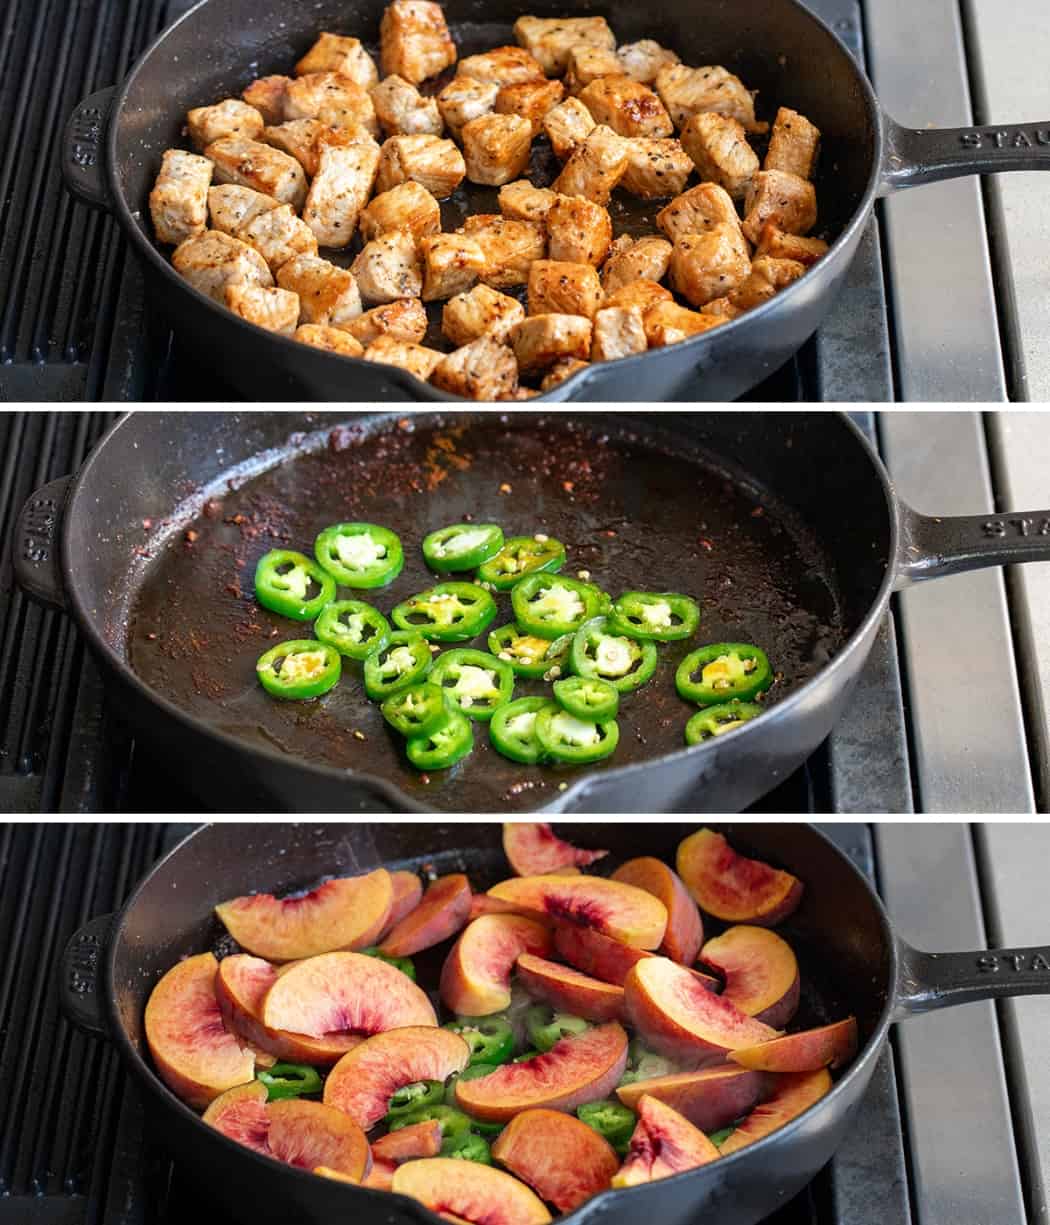 Skillets with pork bites, jalapeno, and fresh peach slices being cooked to make Jalapeno Peach Pork Bites.